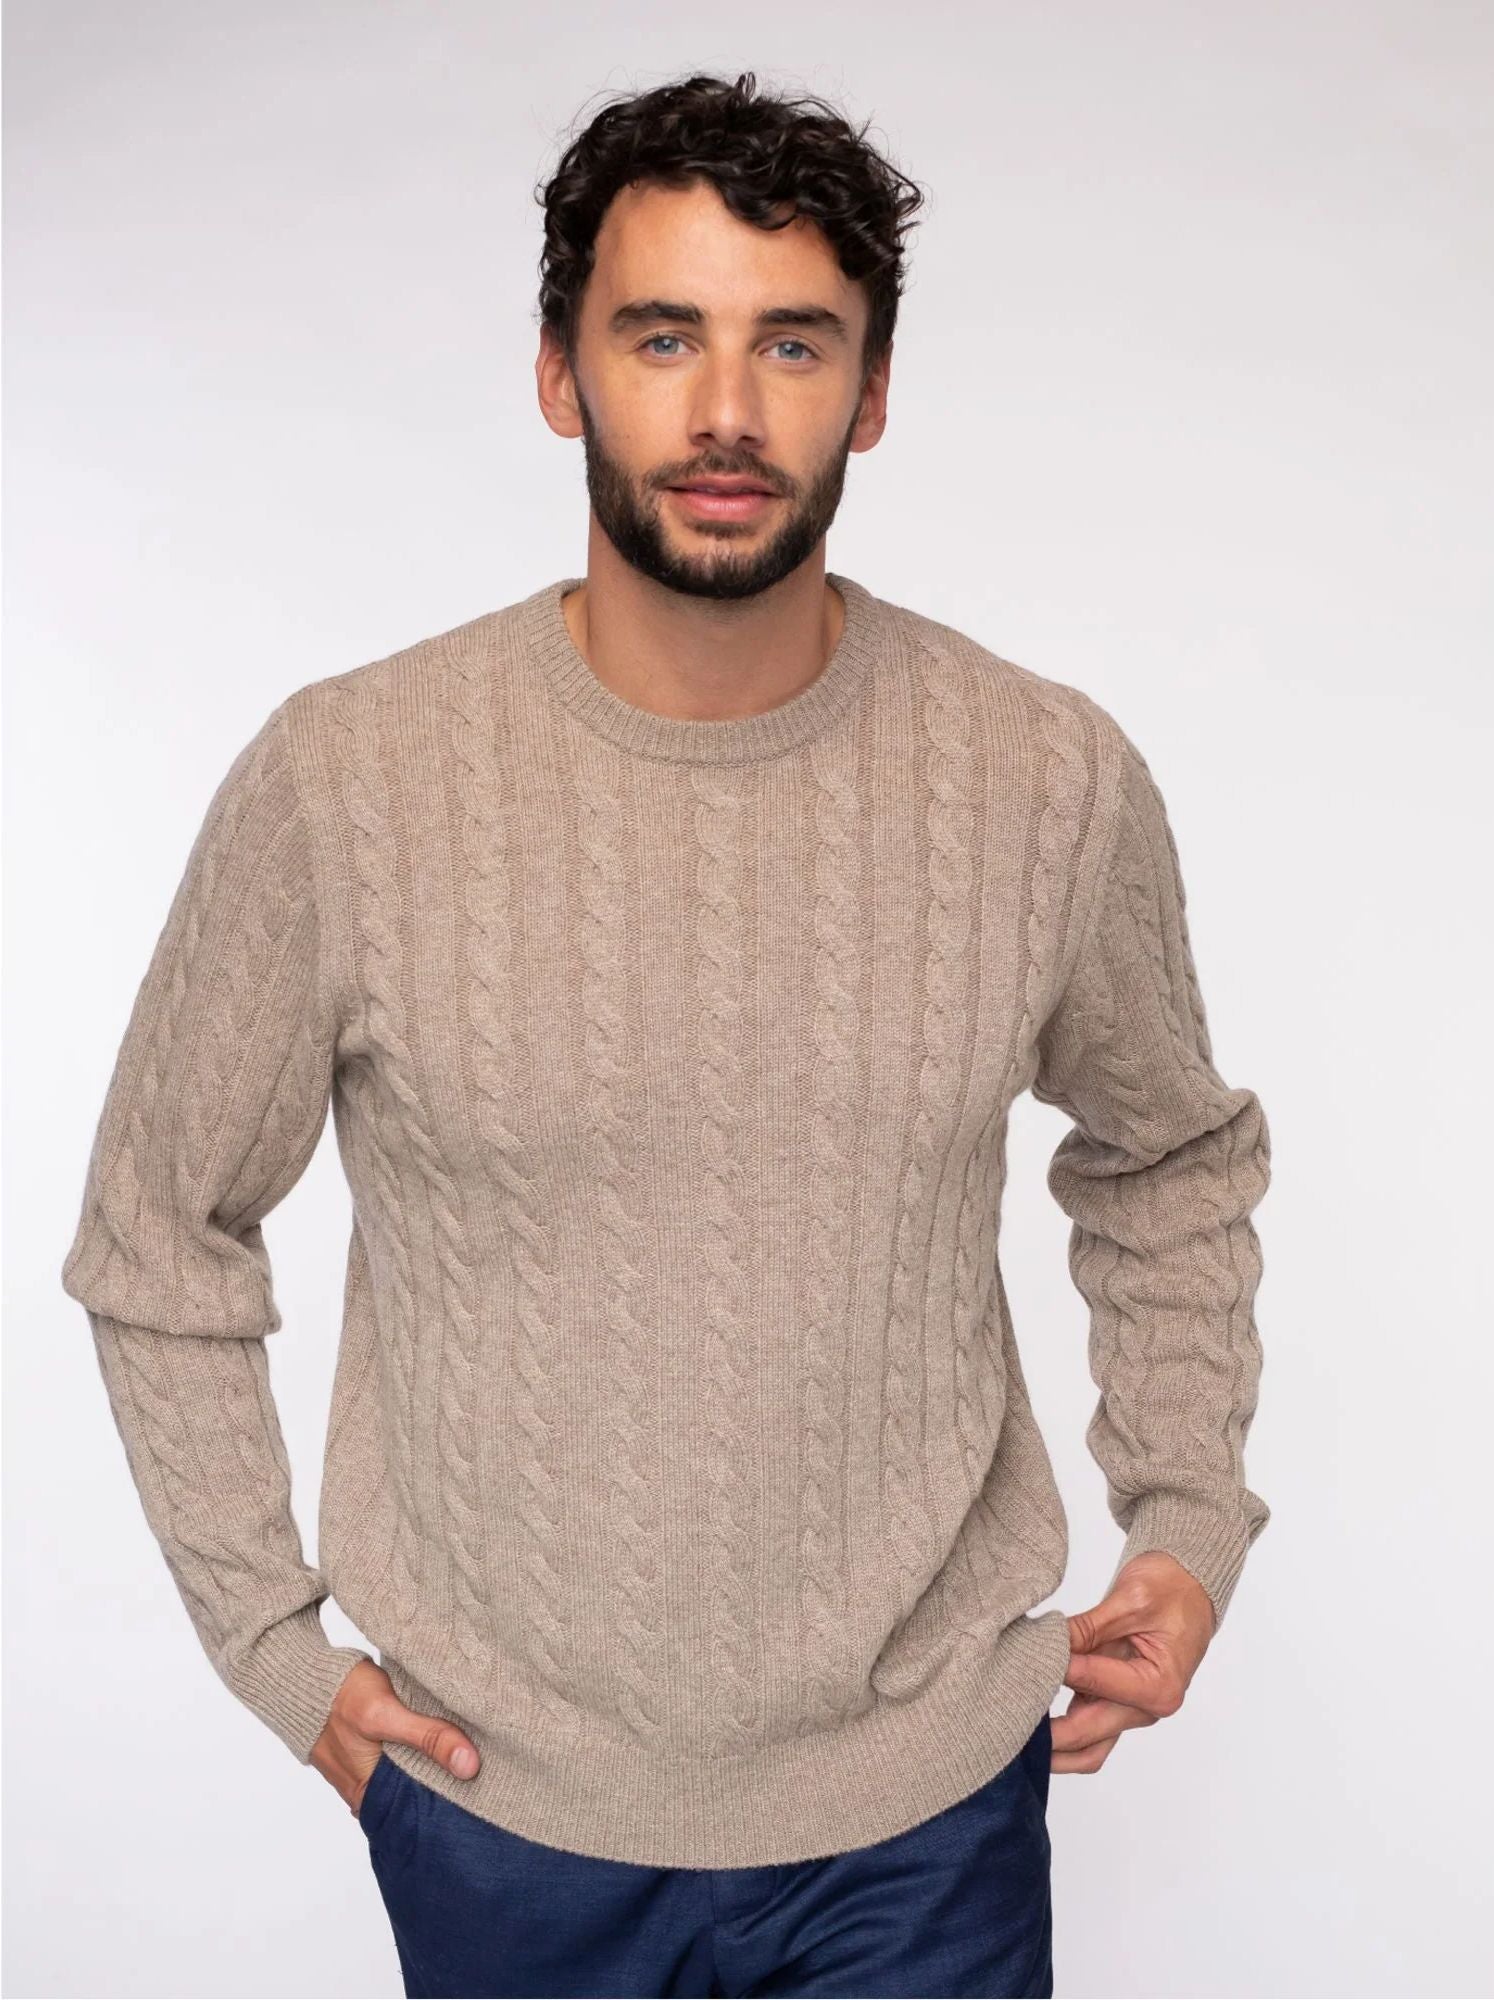 Classic Cable Knit Crew Neck 100% Cashmere Sweater (Choice of Colors) by Alashan Cashmere